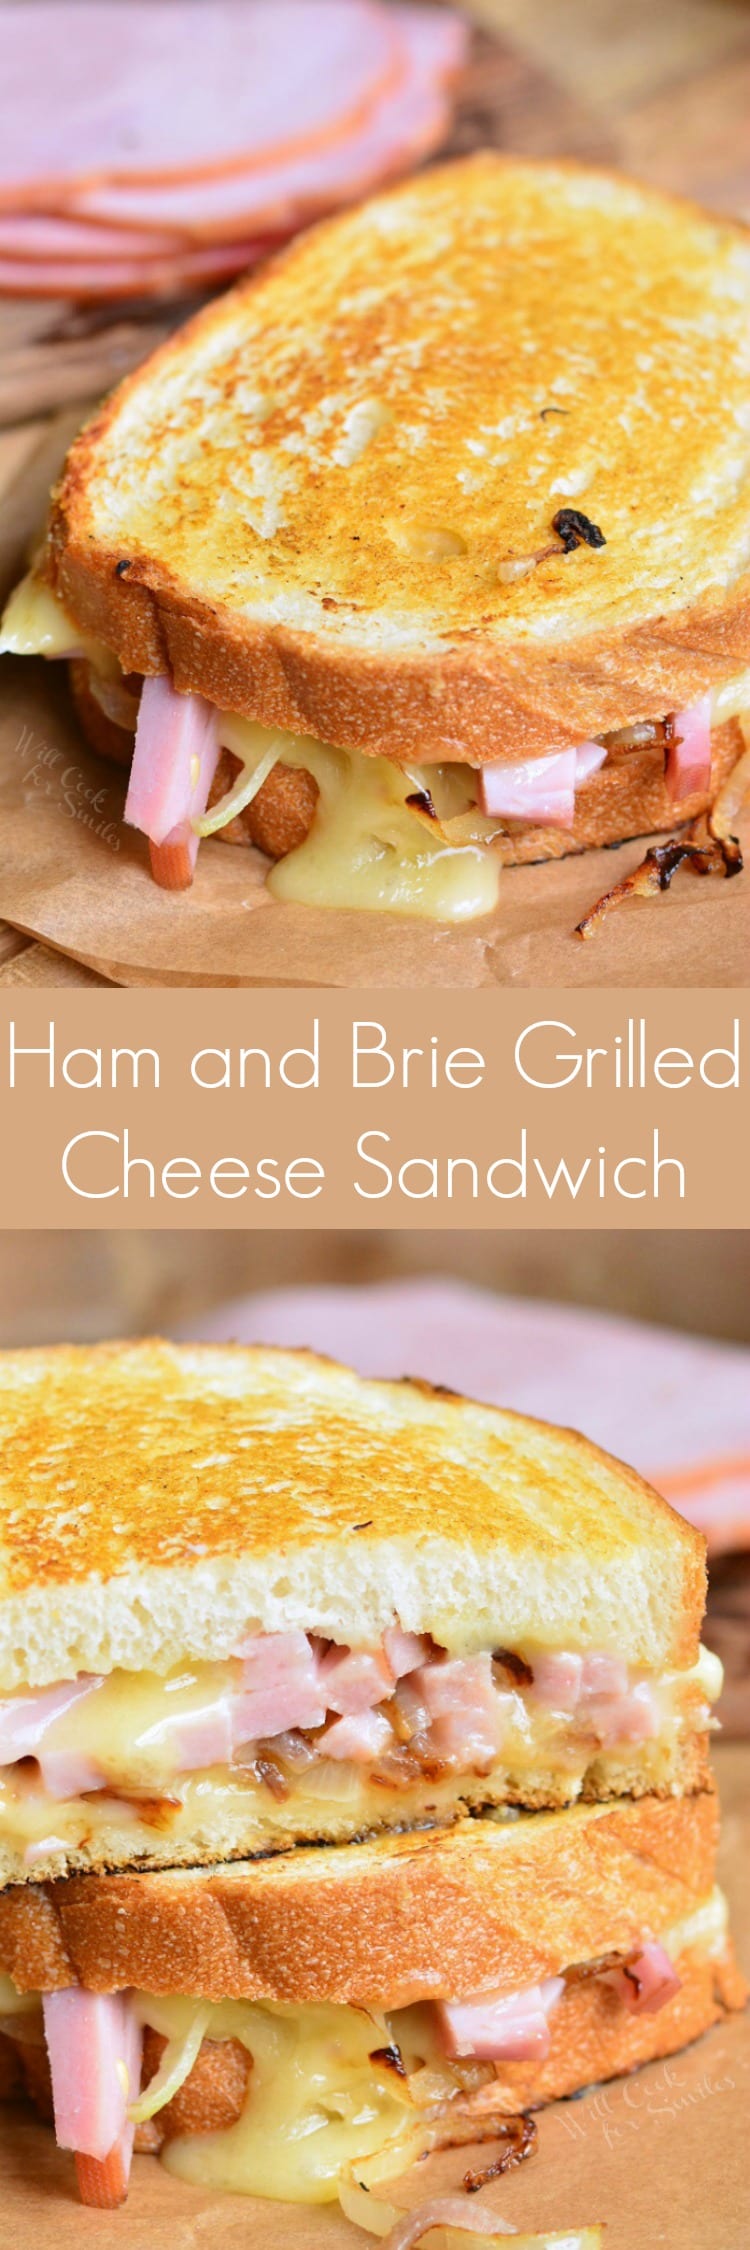 Ham and Brie Grilled Cheese Sandwich on parchment paper on a cutting board collage 